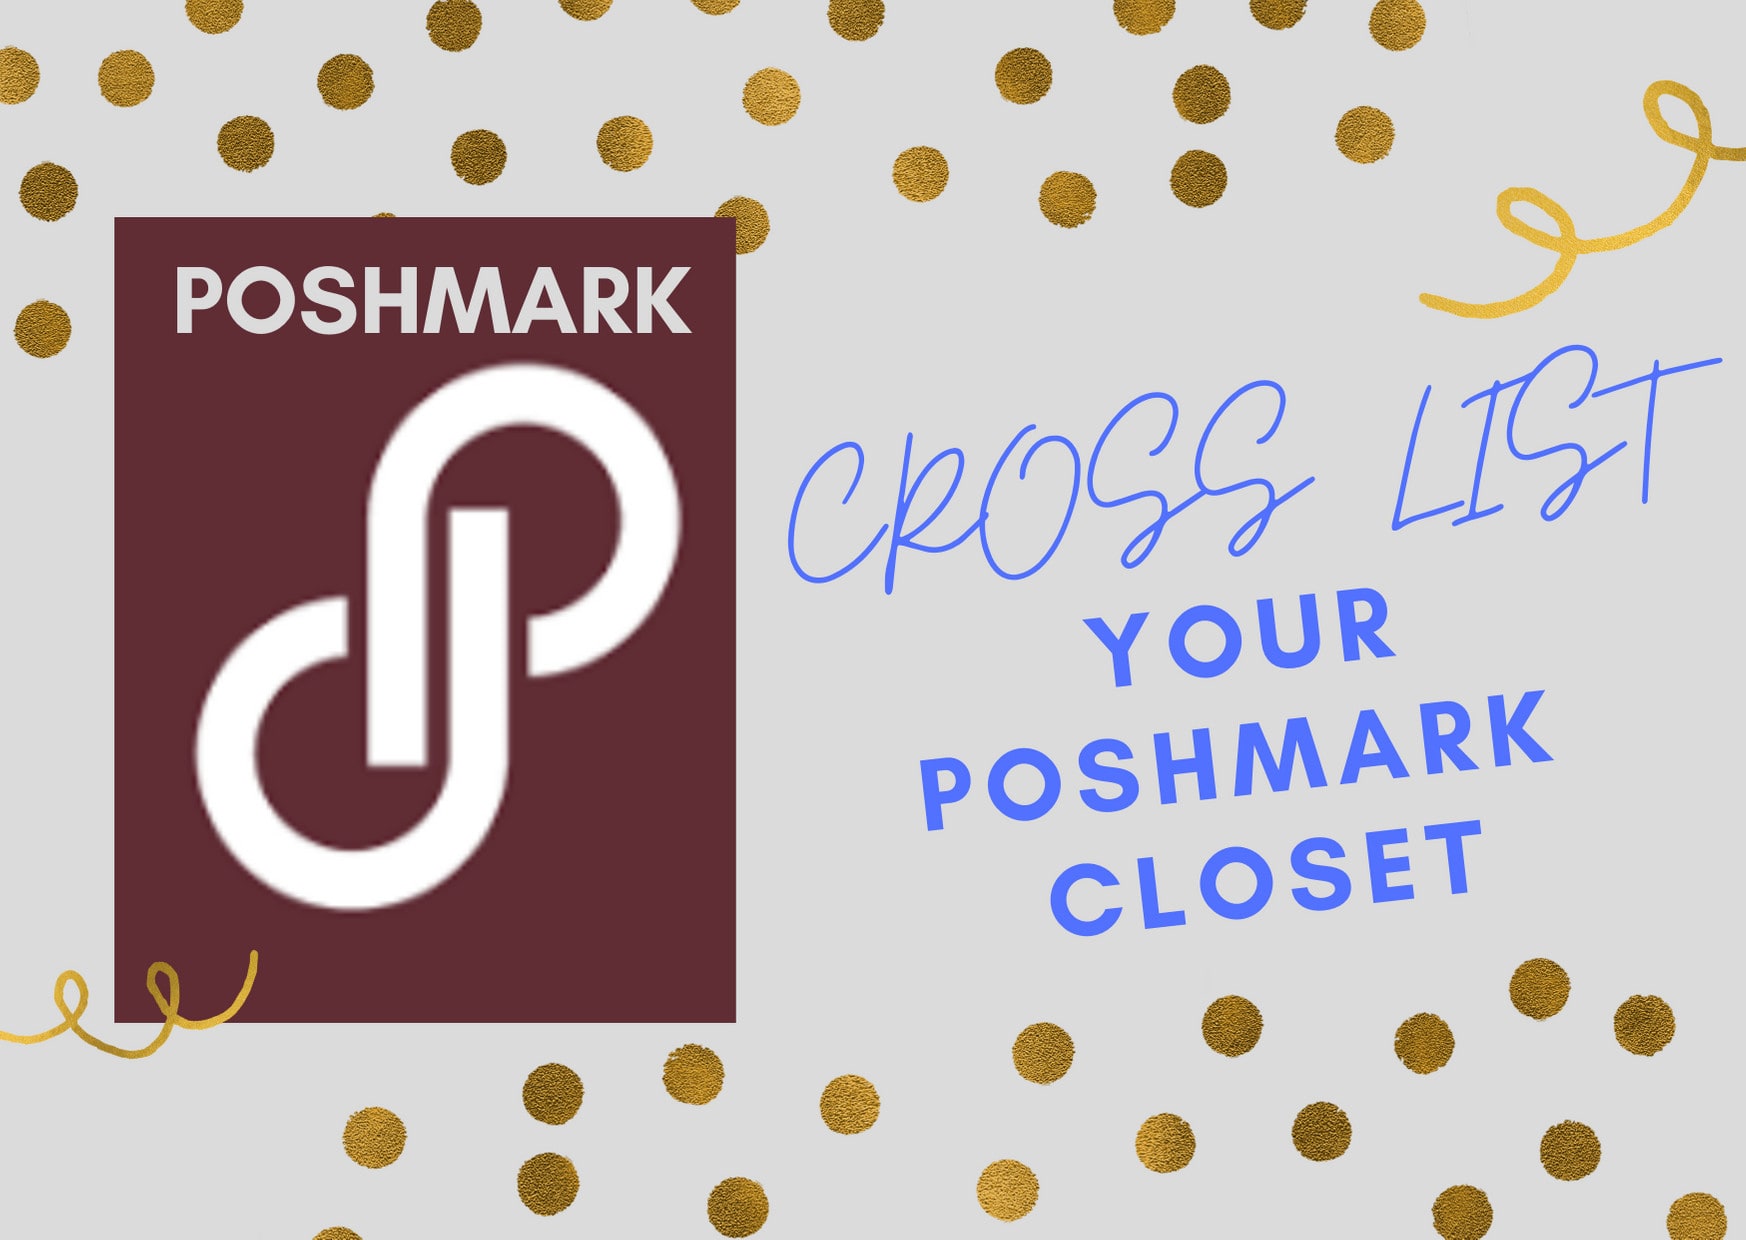 Cross-List Poshmark to Facebook & Import Your Listings